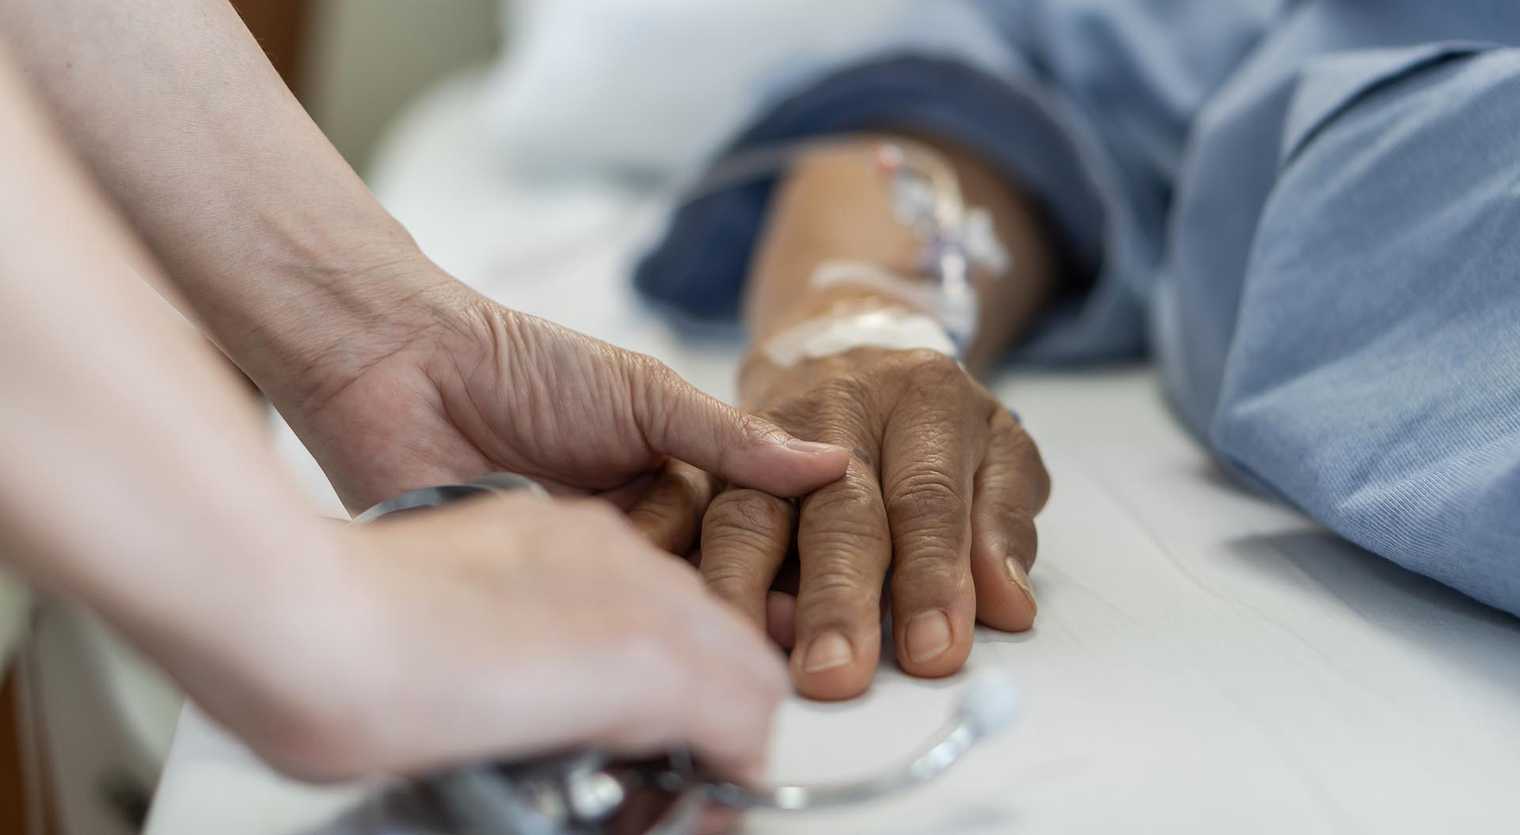 Close up of a doctor's hand holding the hand of an older person